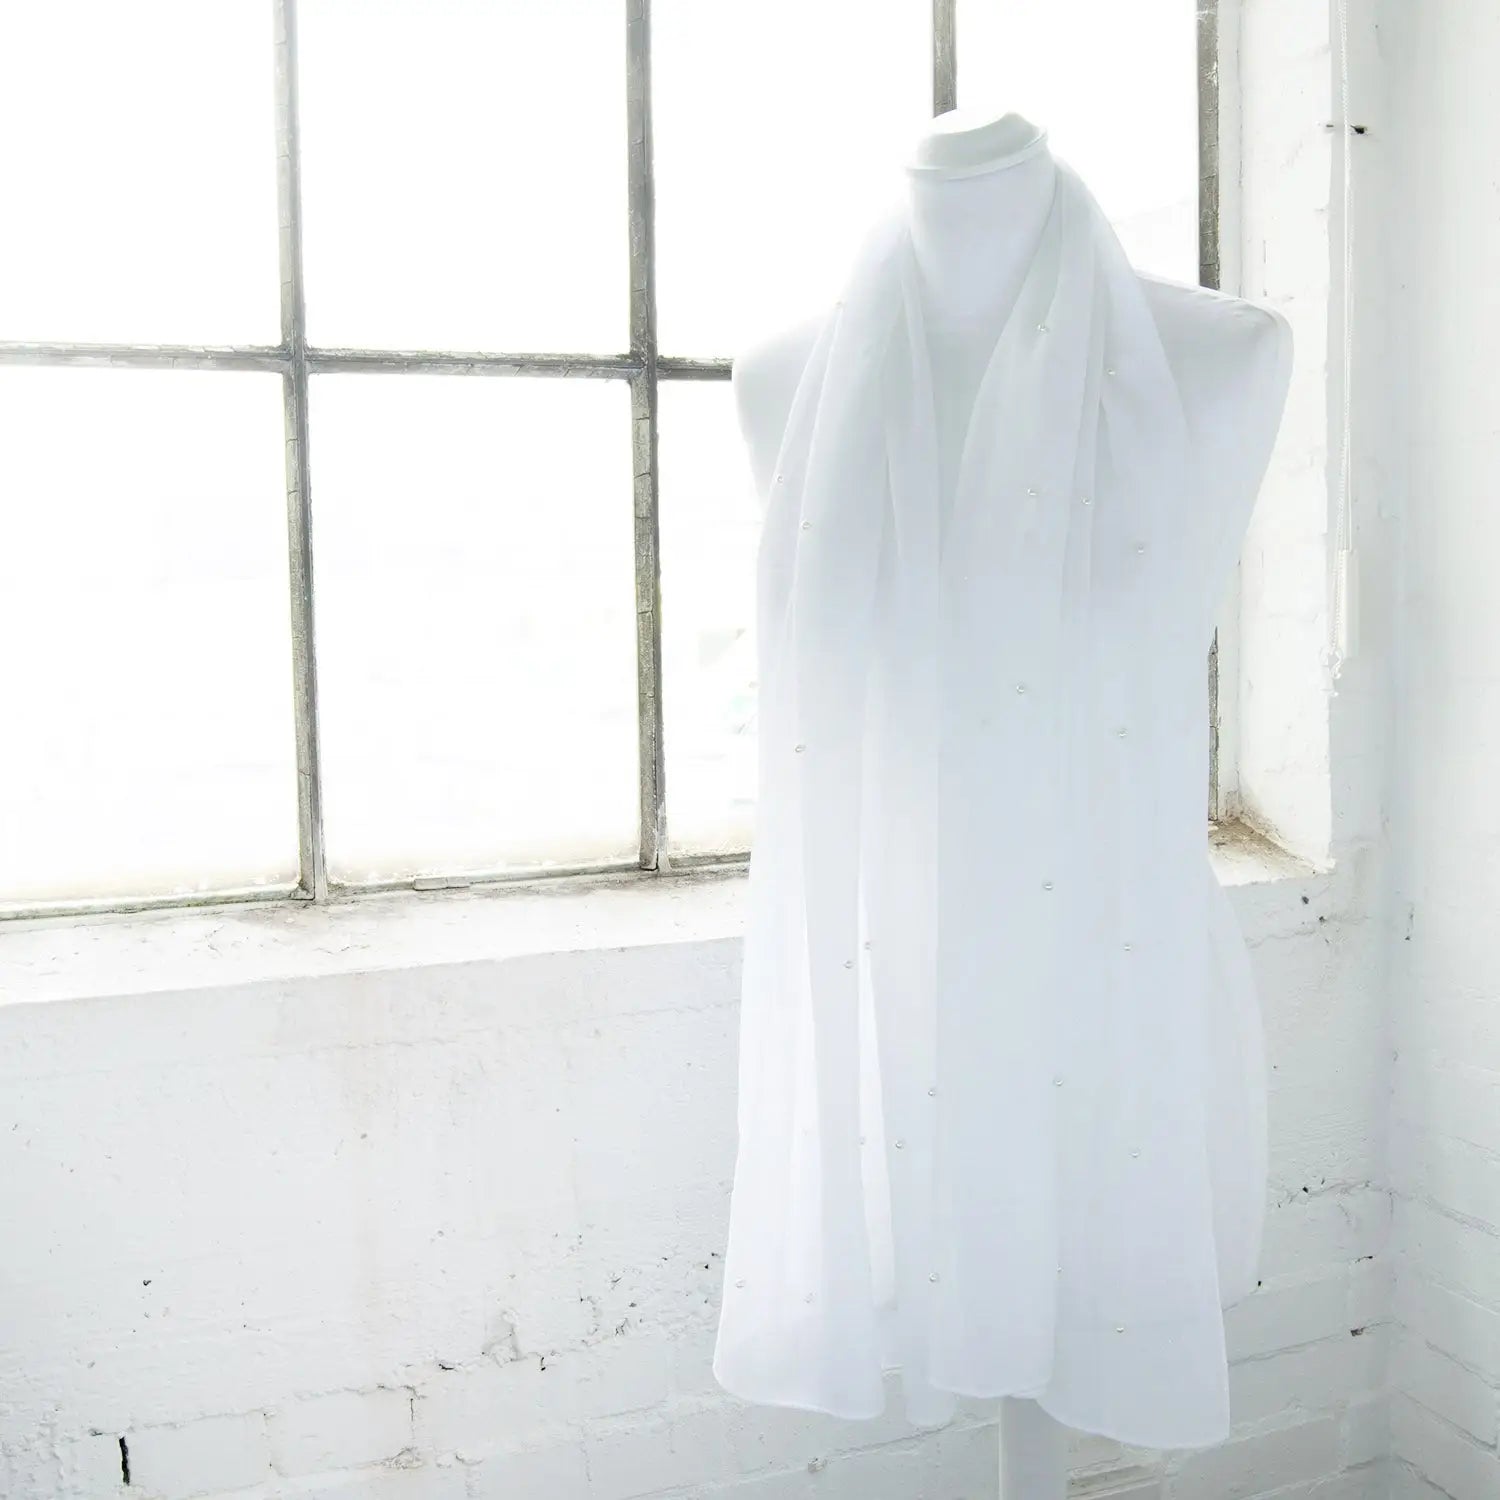 White dress hanging on window side, showcasing Pearl Chiffon Scarf with Durable Pearl Attachments